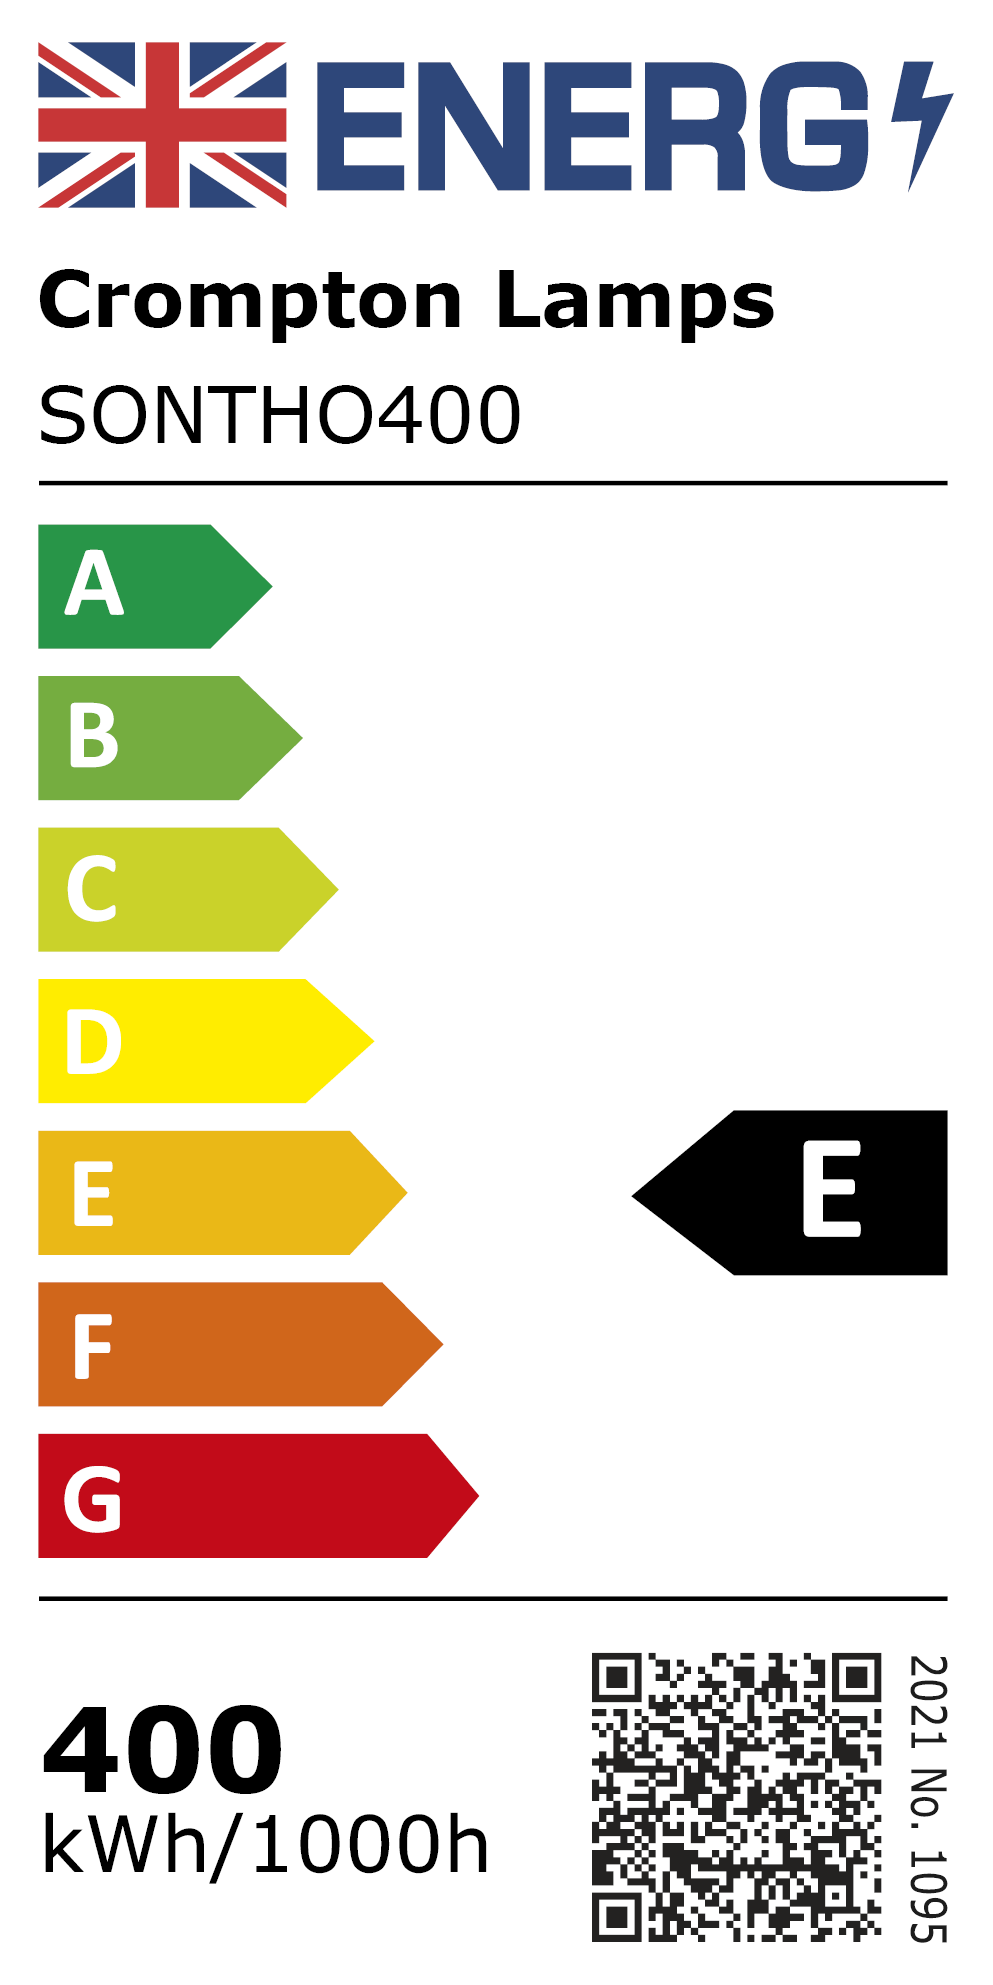 New 2021 Energy Rating Label: Stock Code SONTHO400